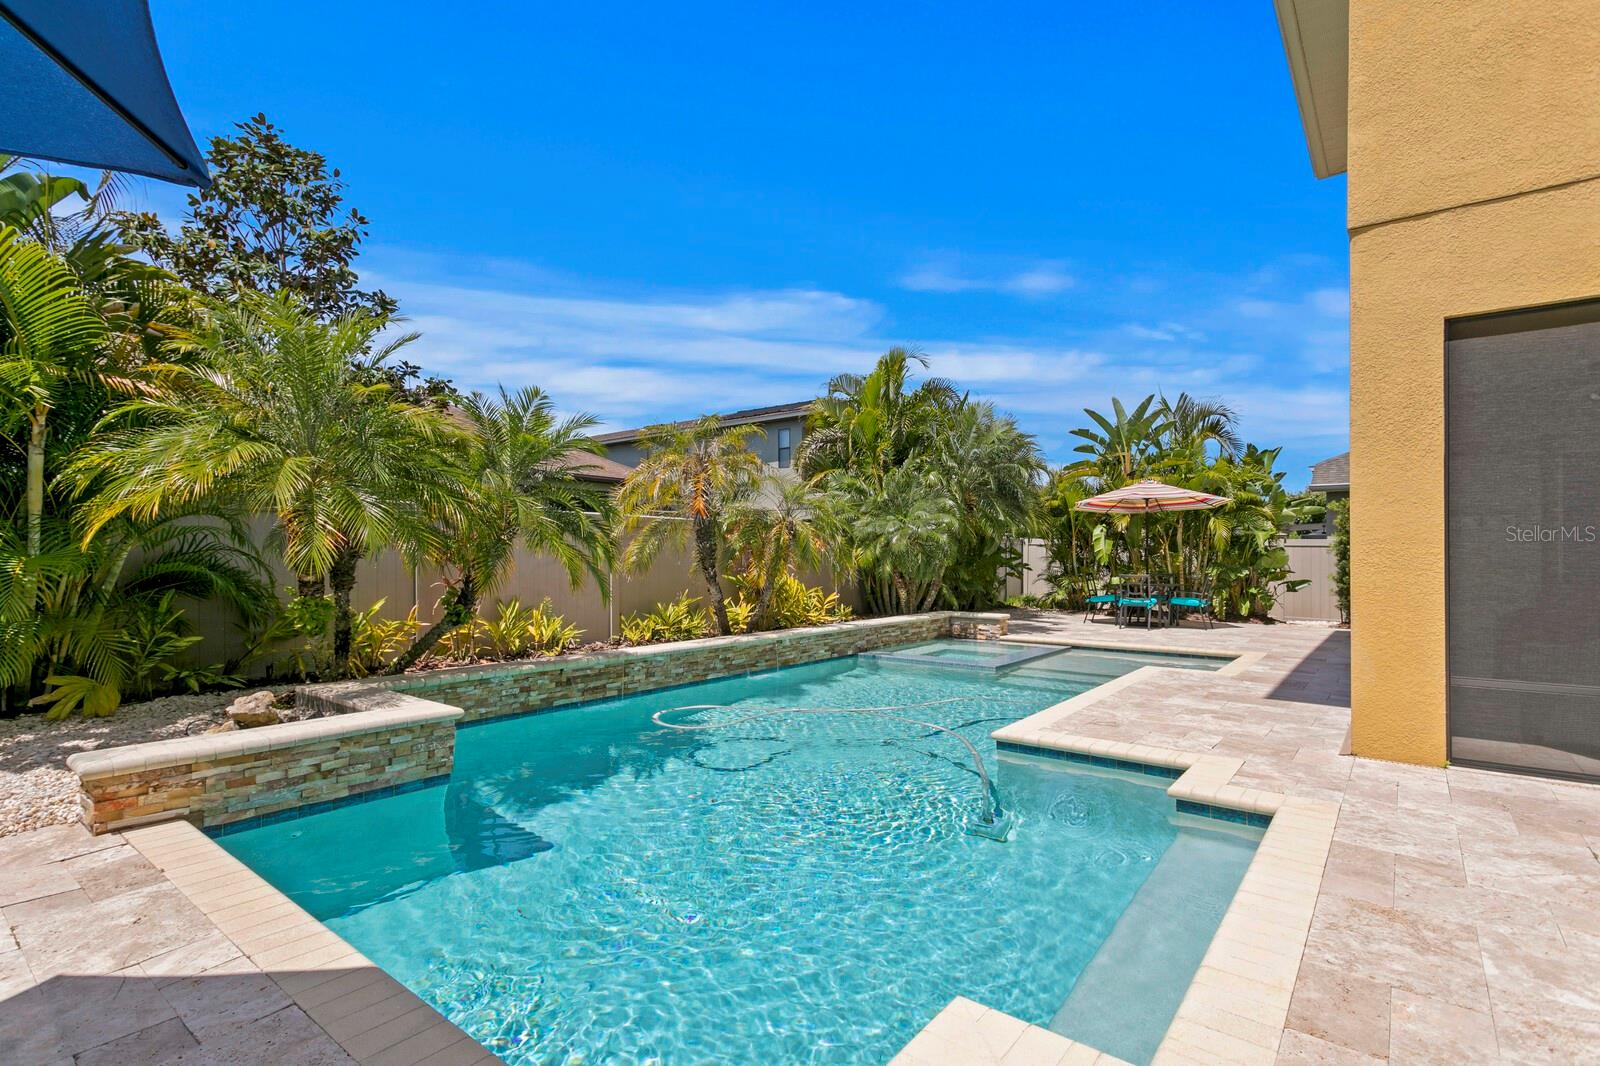 The light this pool catches keeps it warm & makes it a great open outdoor oasis.